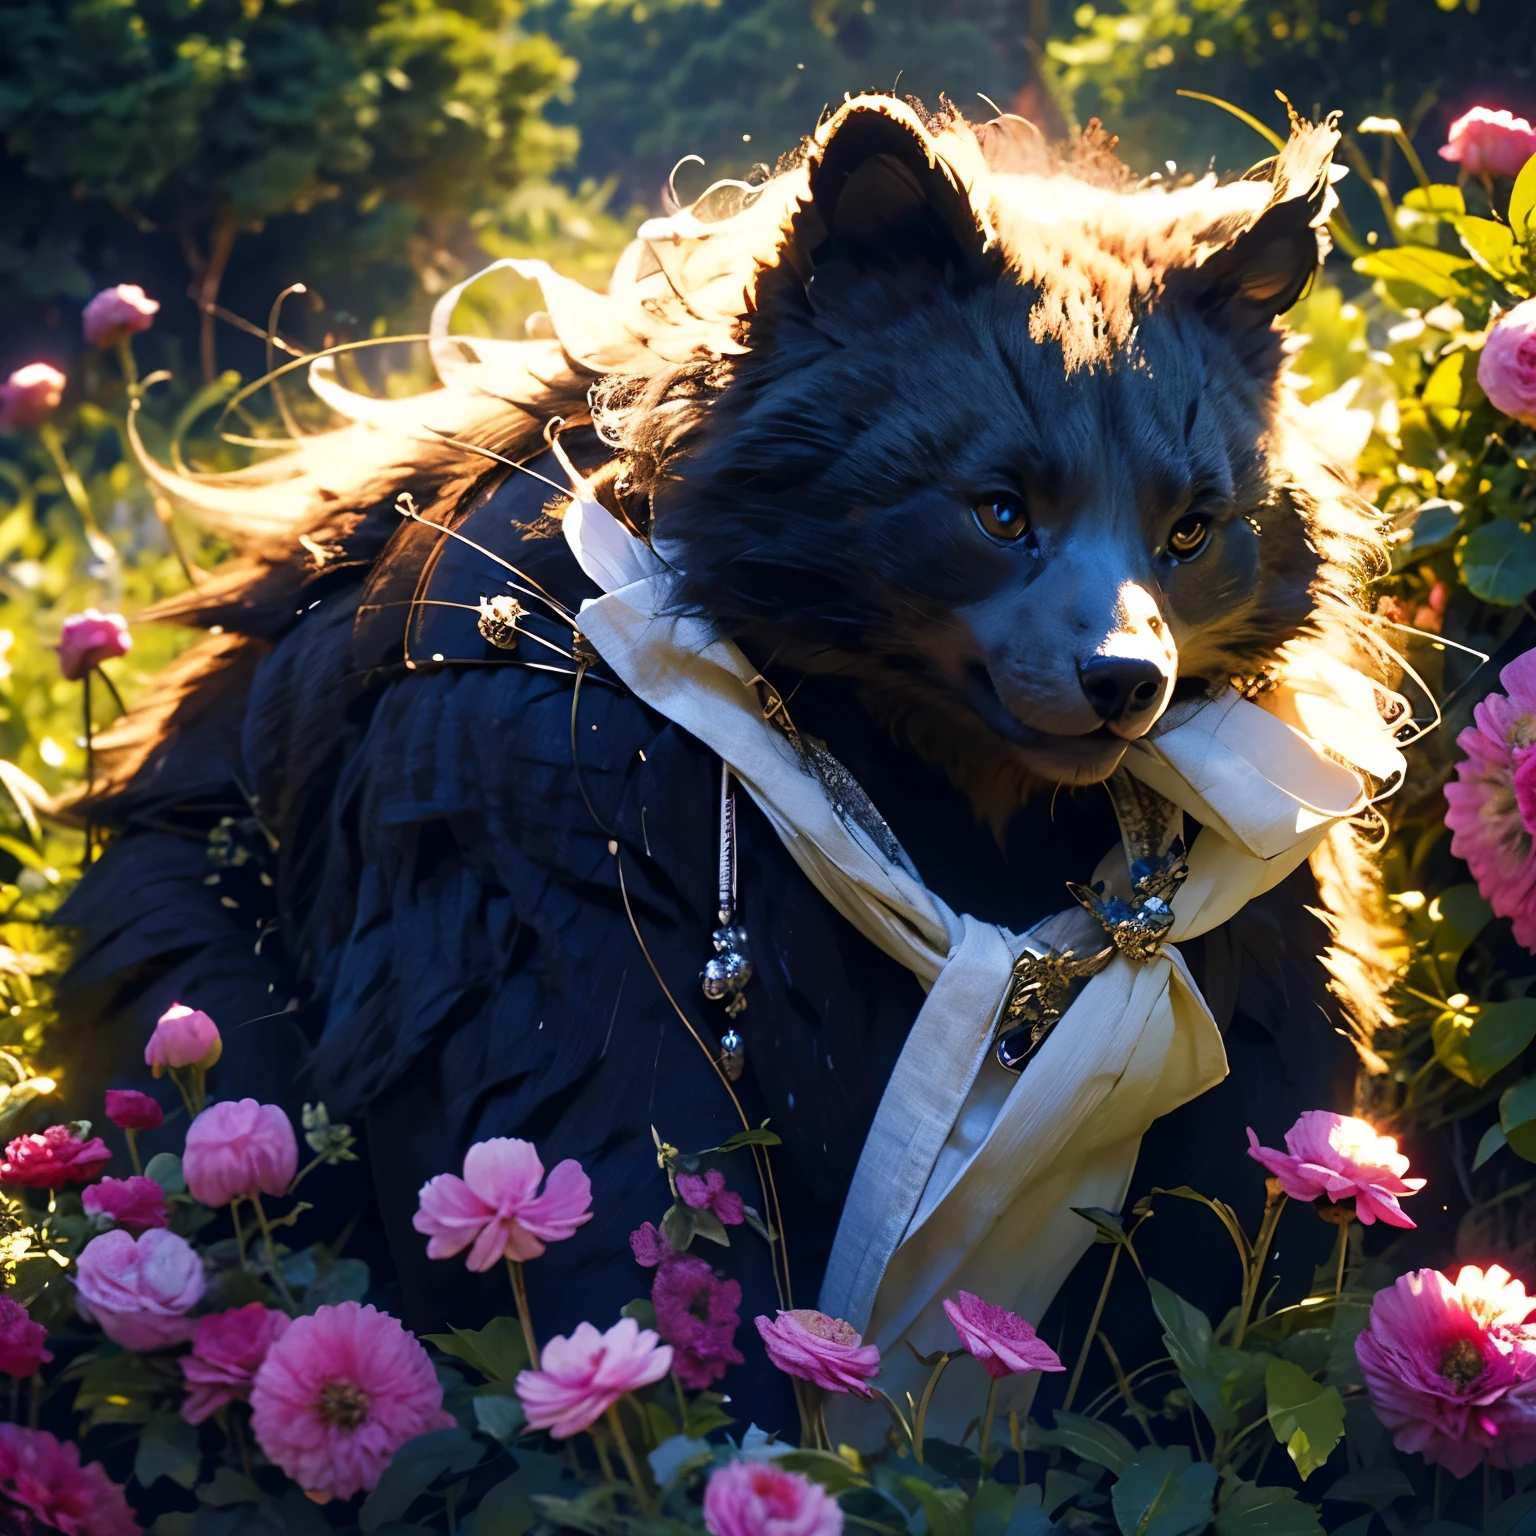 A beautiful sunny day，An adult bear orc wearing casual clothes is holding flower seeds in the garden and looking at the flowers with smiling eyes.，